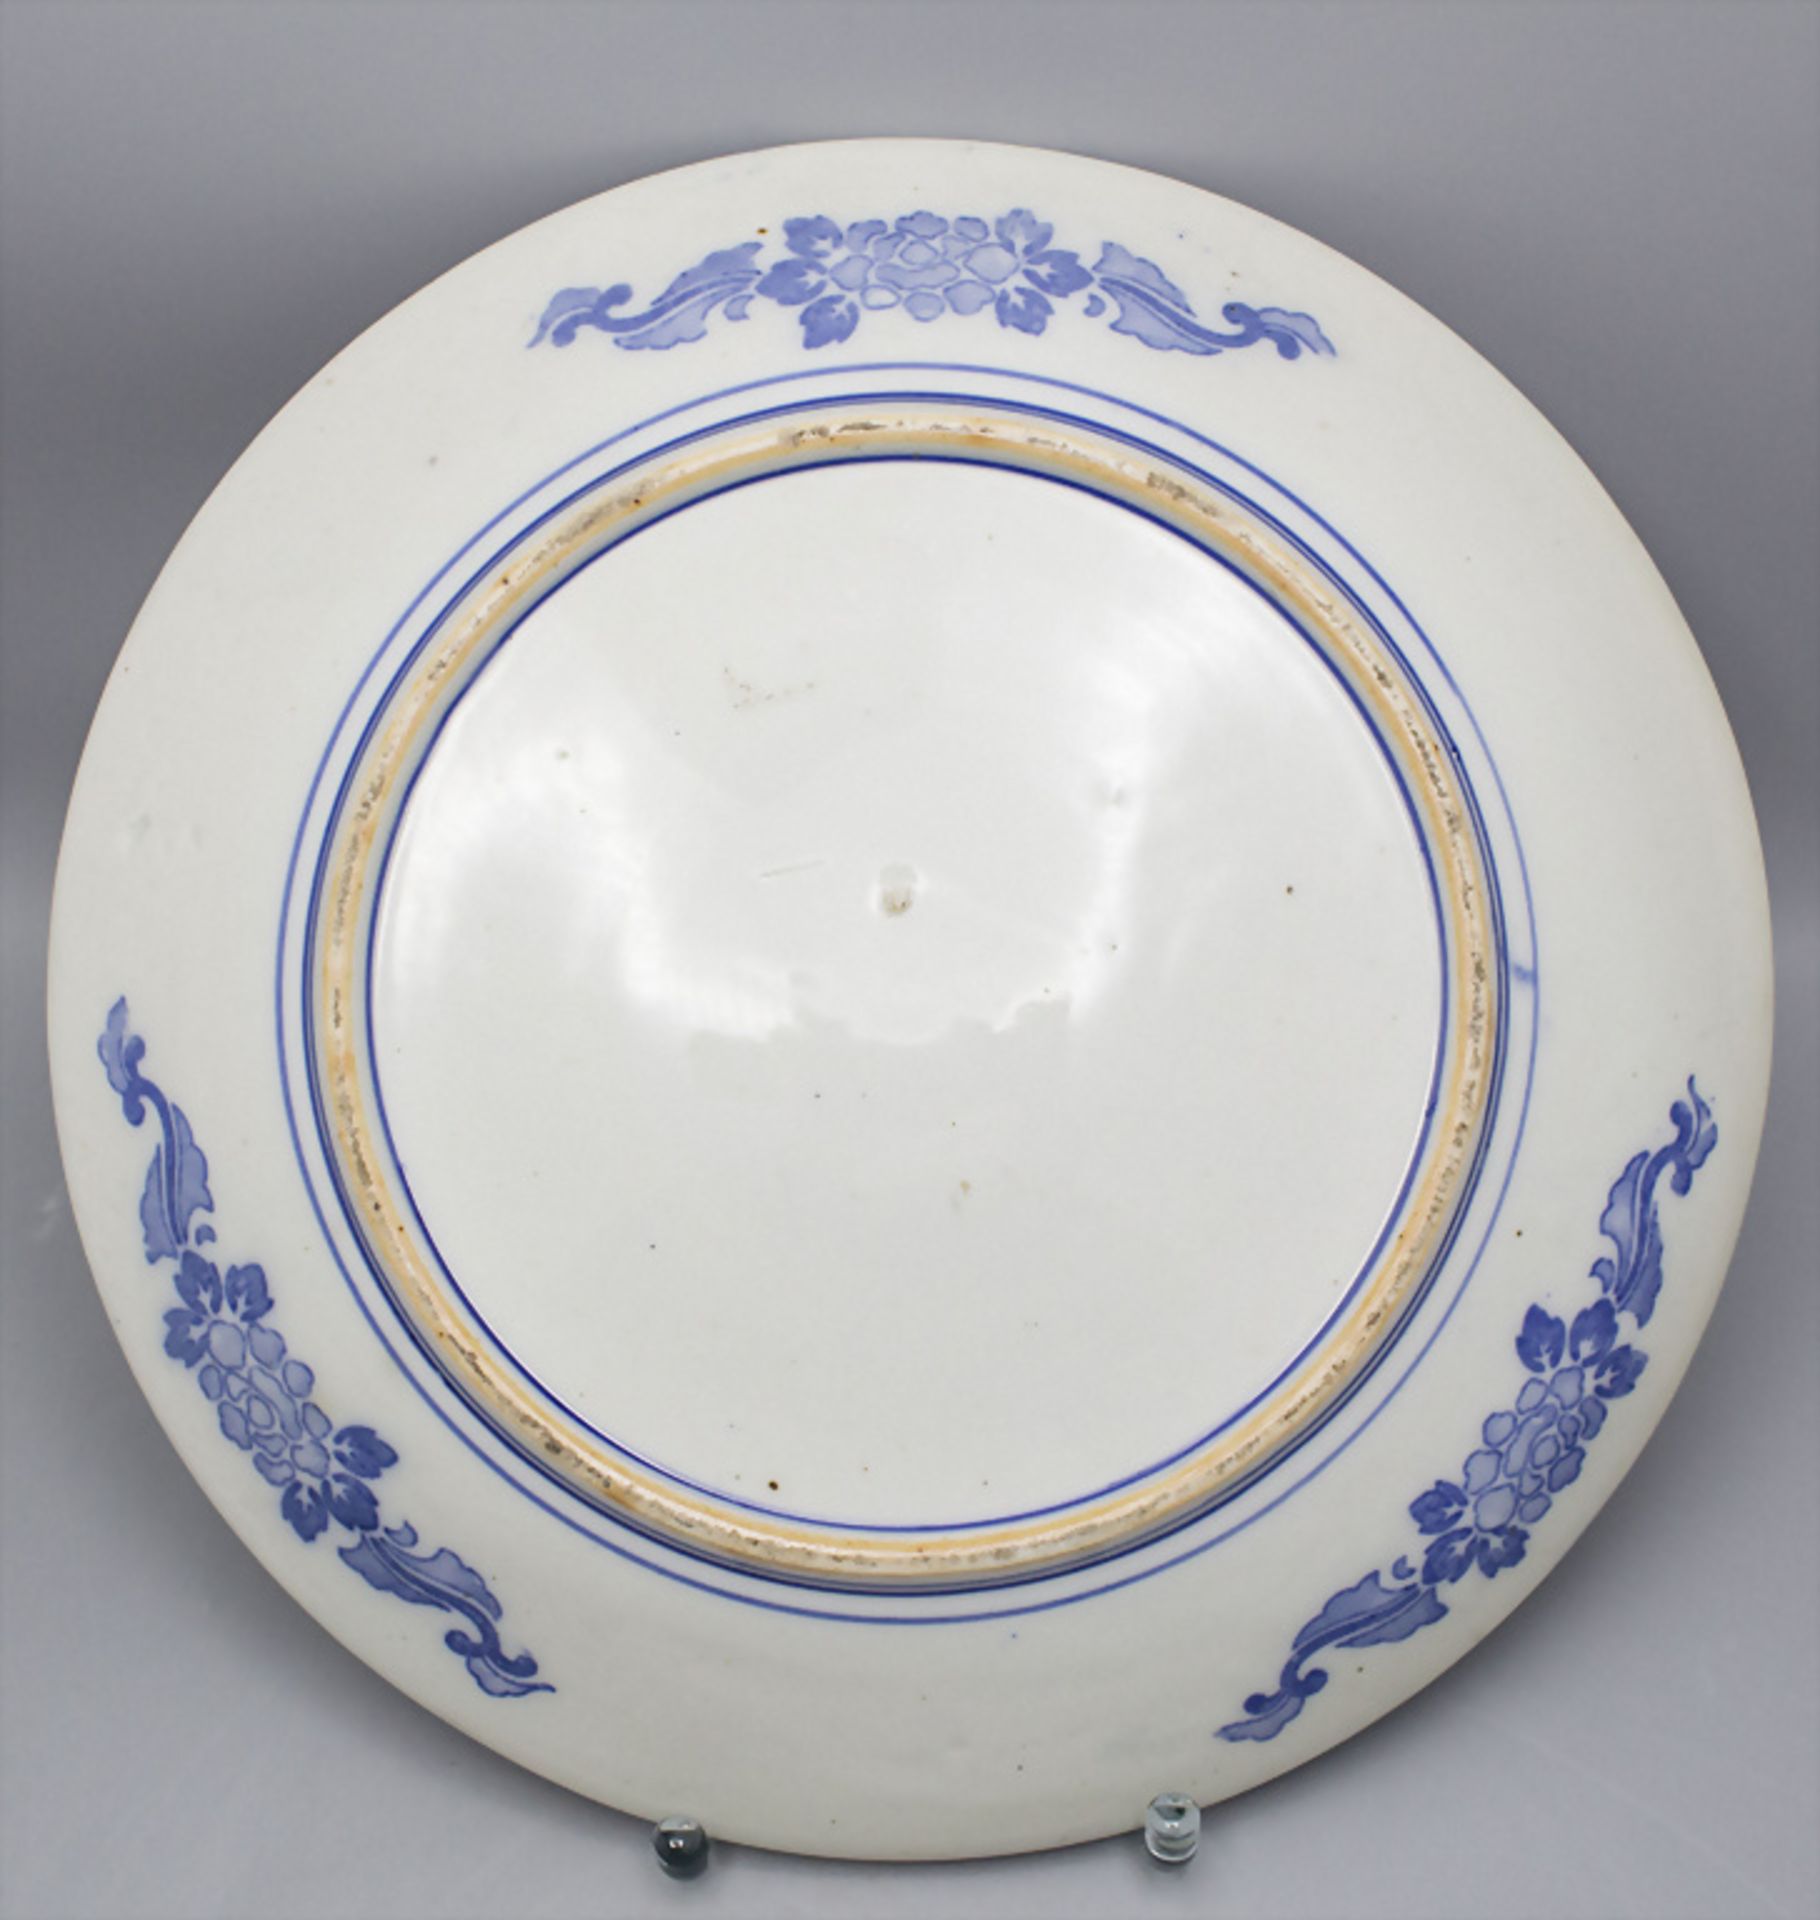 Teller / A plate, China, um 1900 - Image 3 of 4